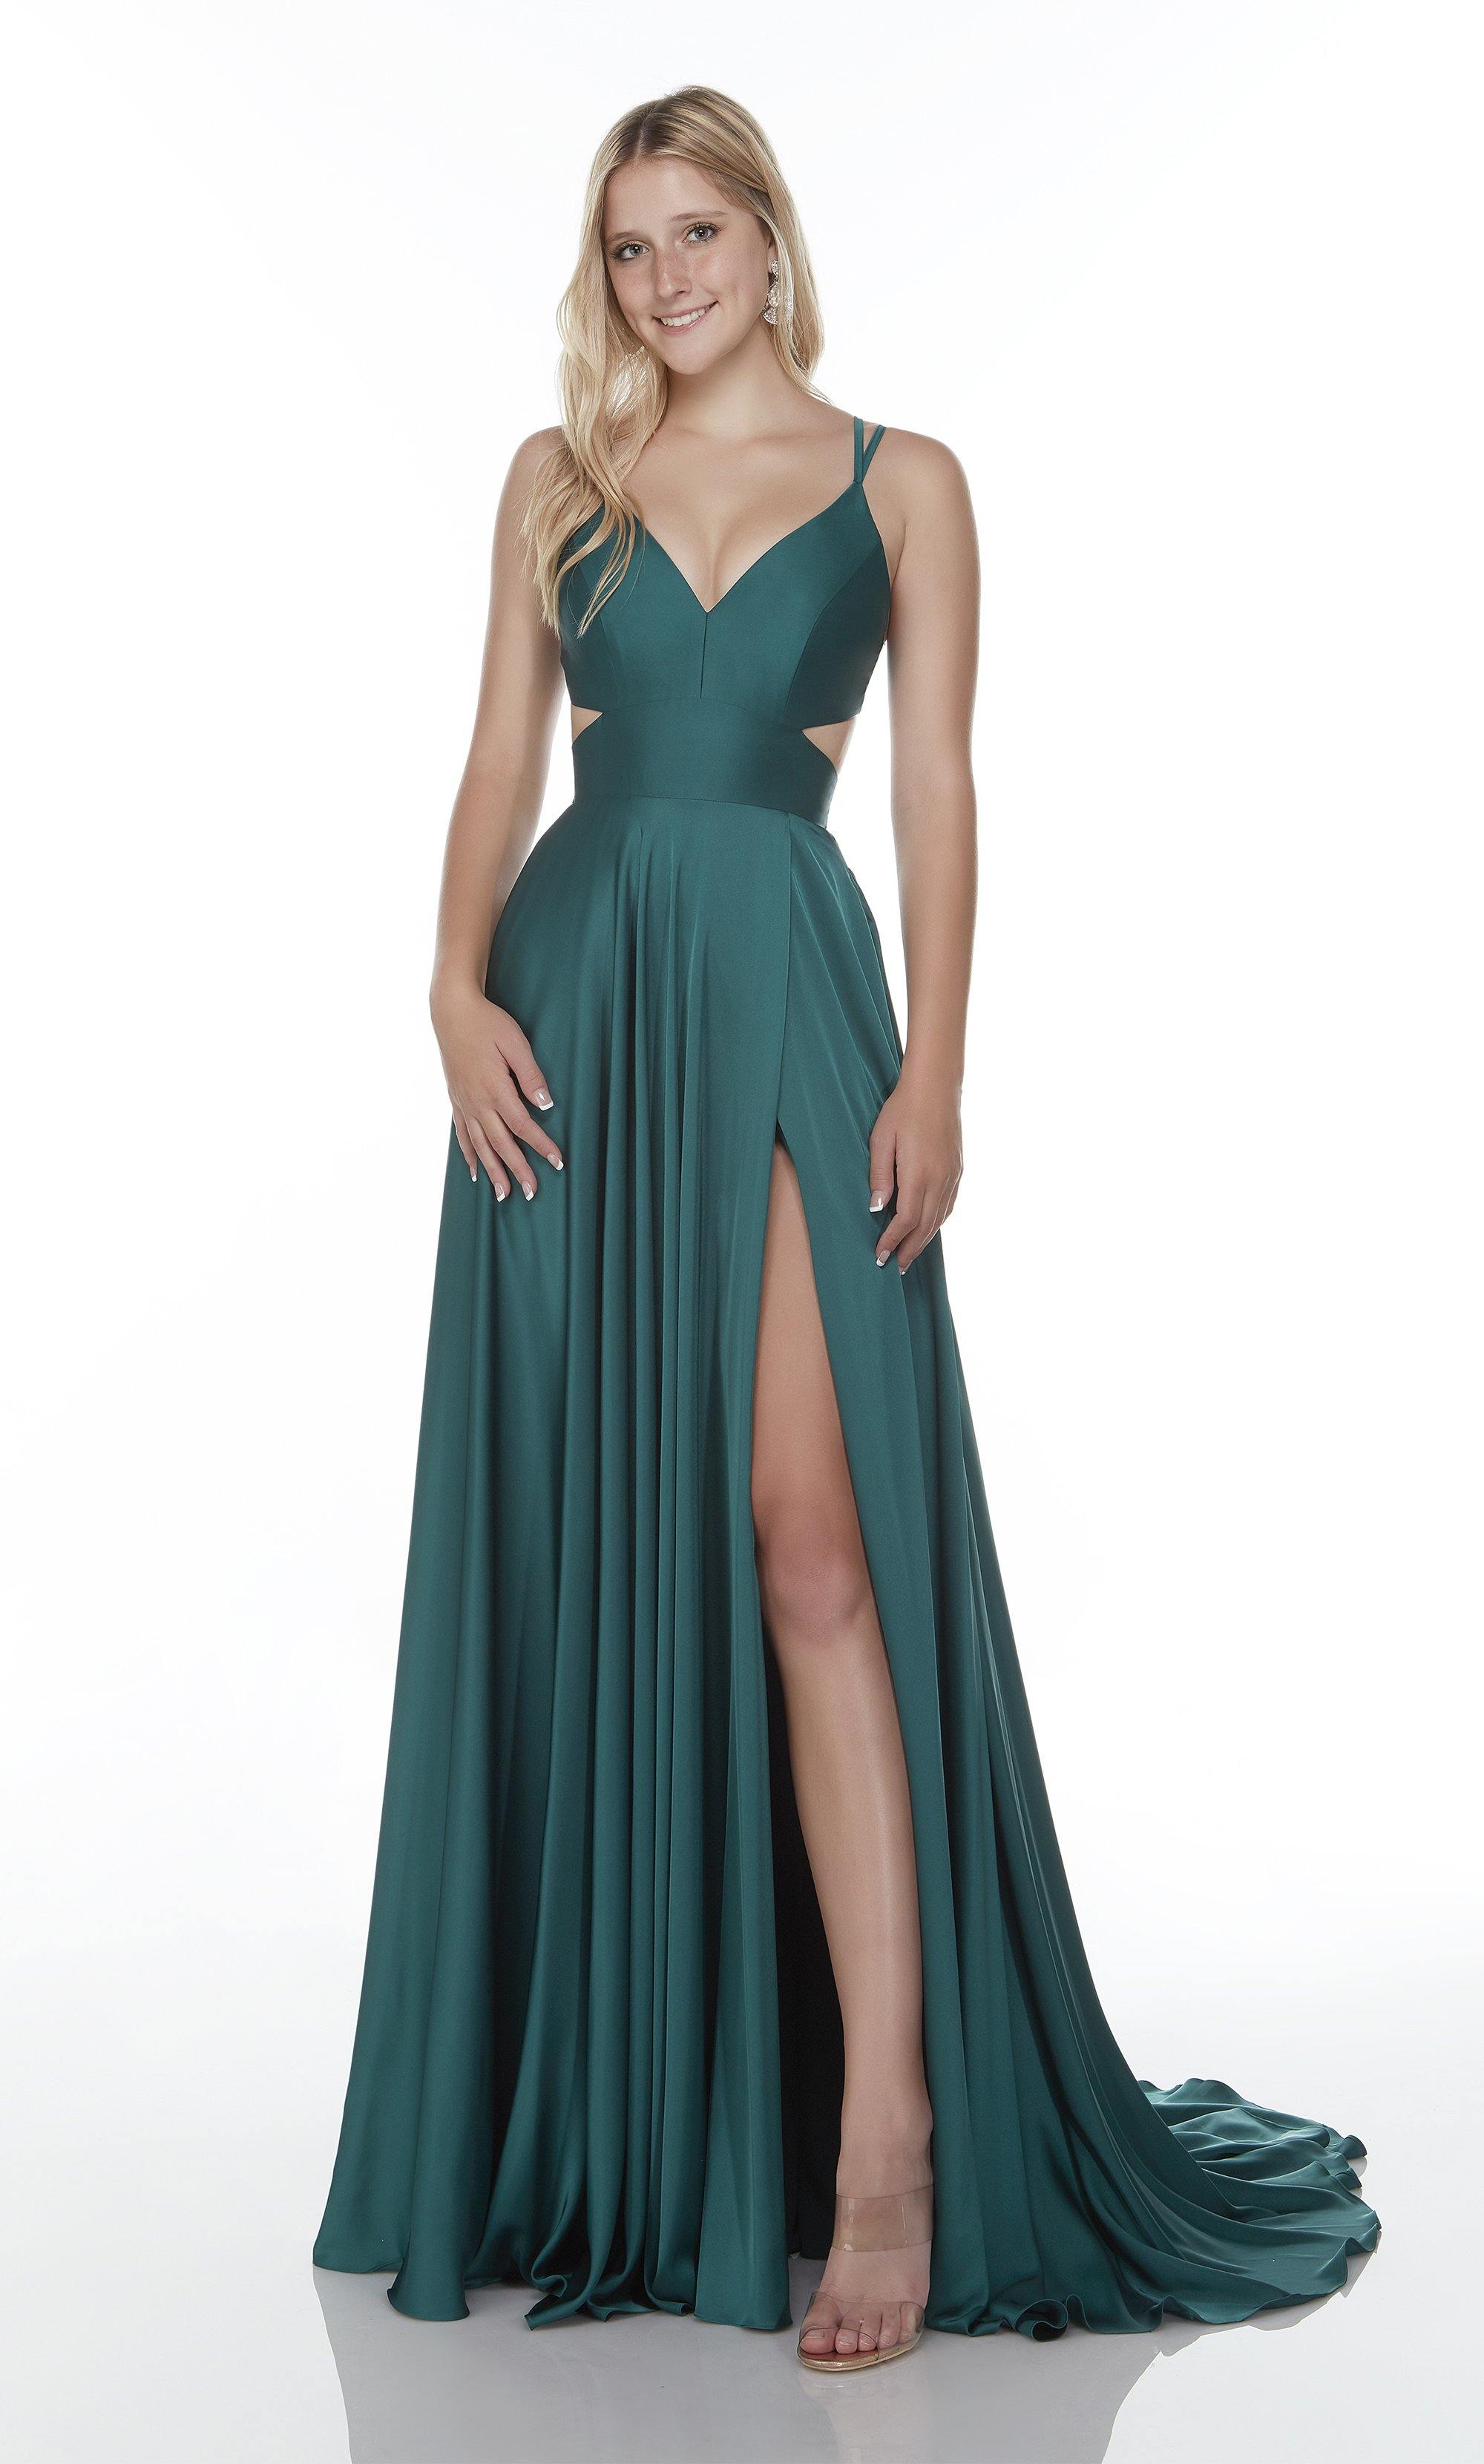 Flowy satin prom dress with a V-neckline, side cutouts, and high side slit.